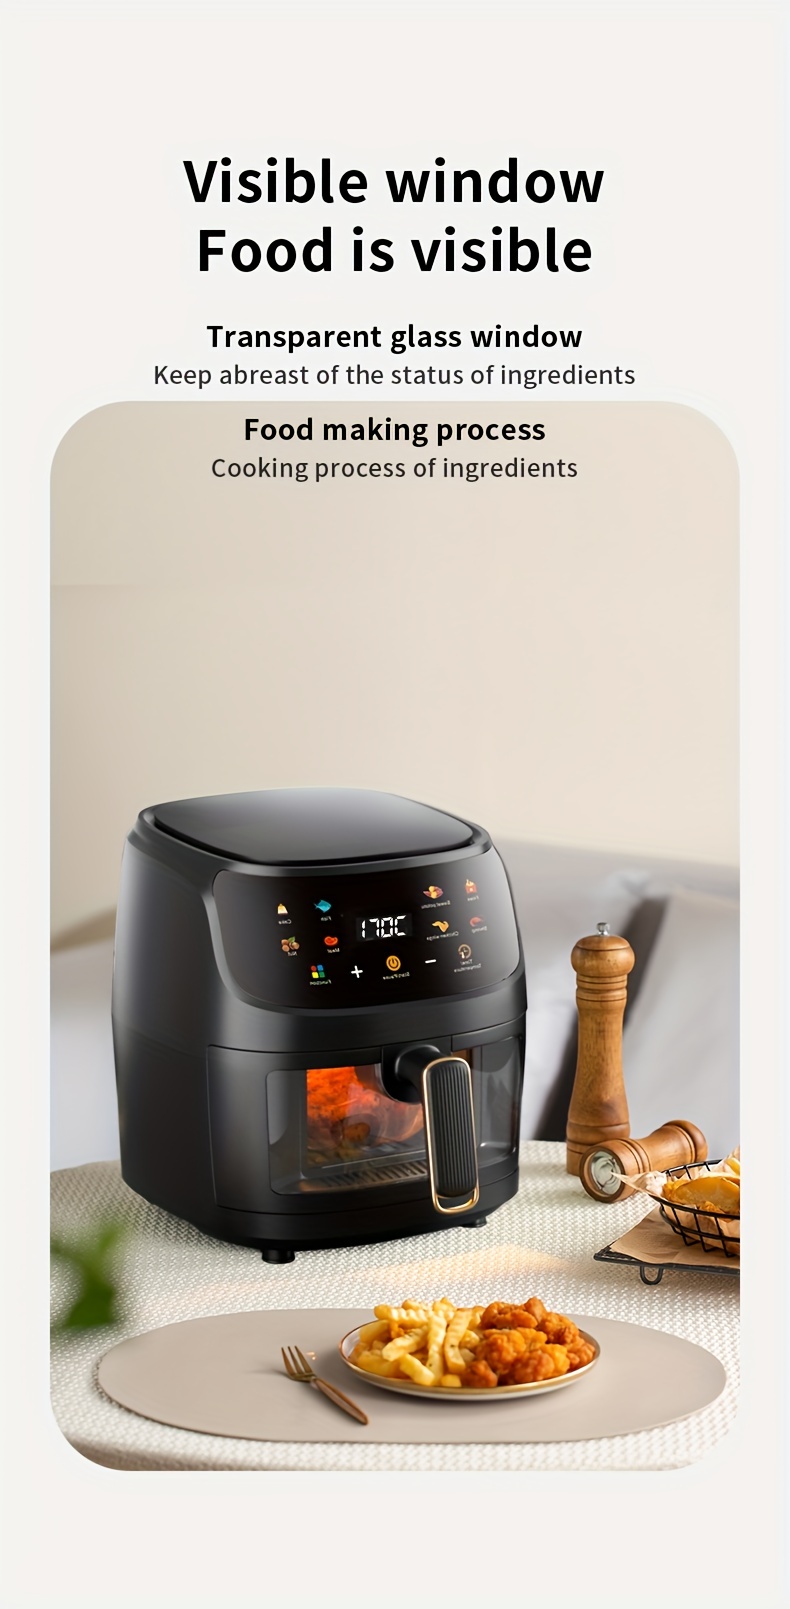 Air Fryer Large Colorful Touch Screen Electric Fryer 6L Capacity